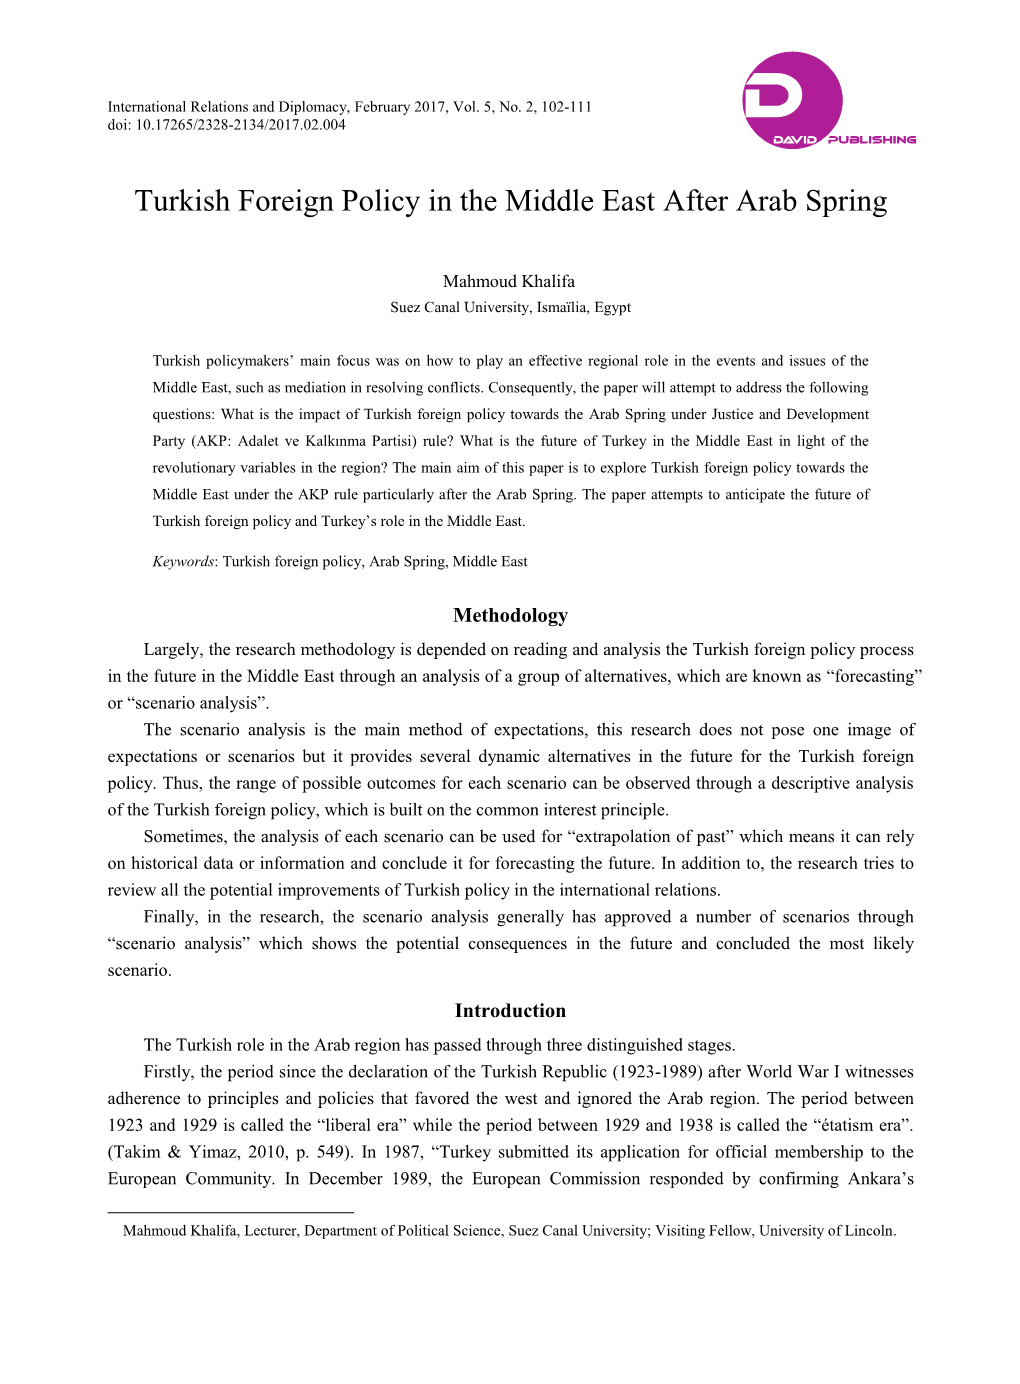 Turkish Foreign Policy in the Middle East After Arab Spring